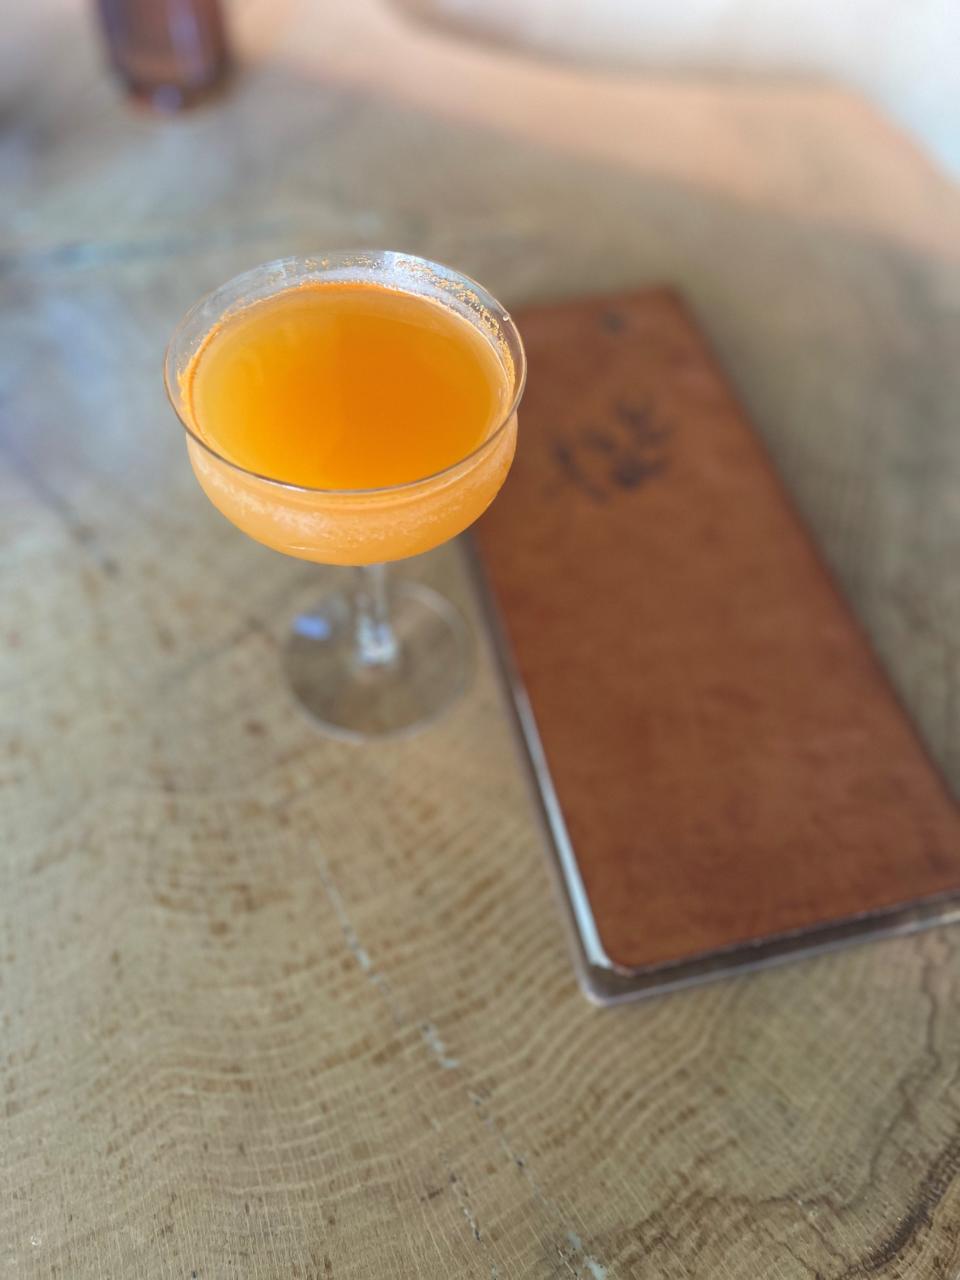 The What’s Up Doc? cocktail at MeeshMeesh Mediterranean in Louisville is made with lemon, carrot, ginger, and vodka.